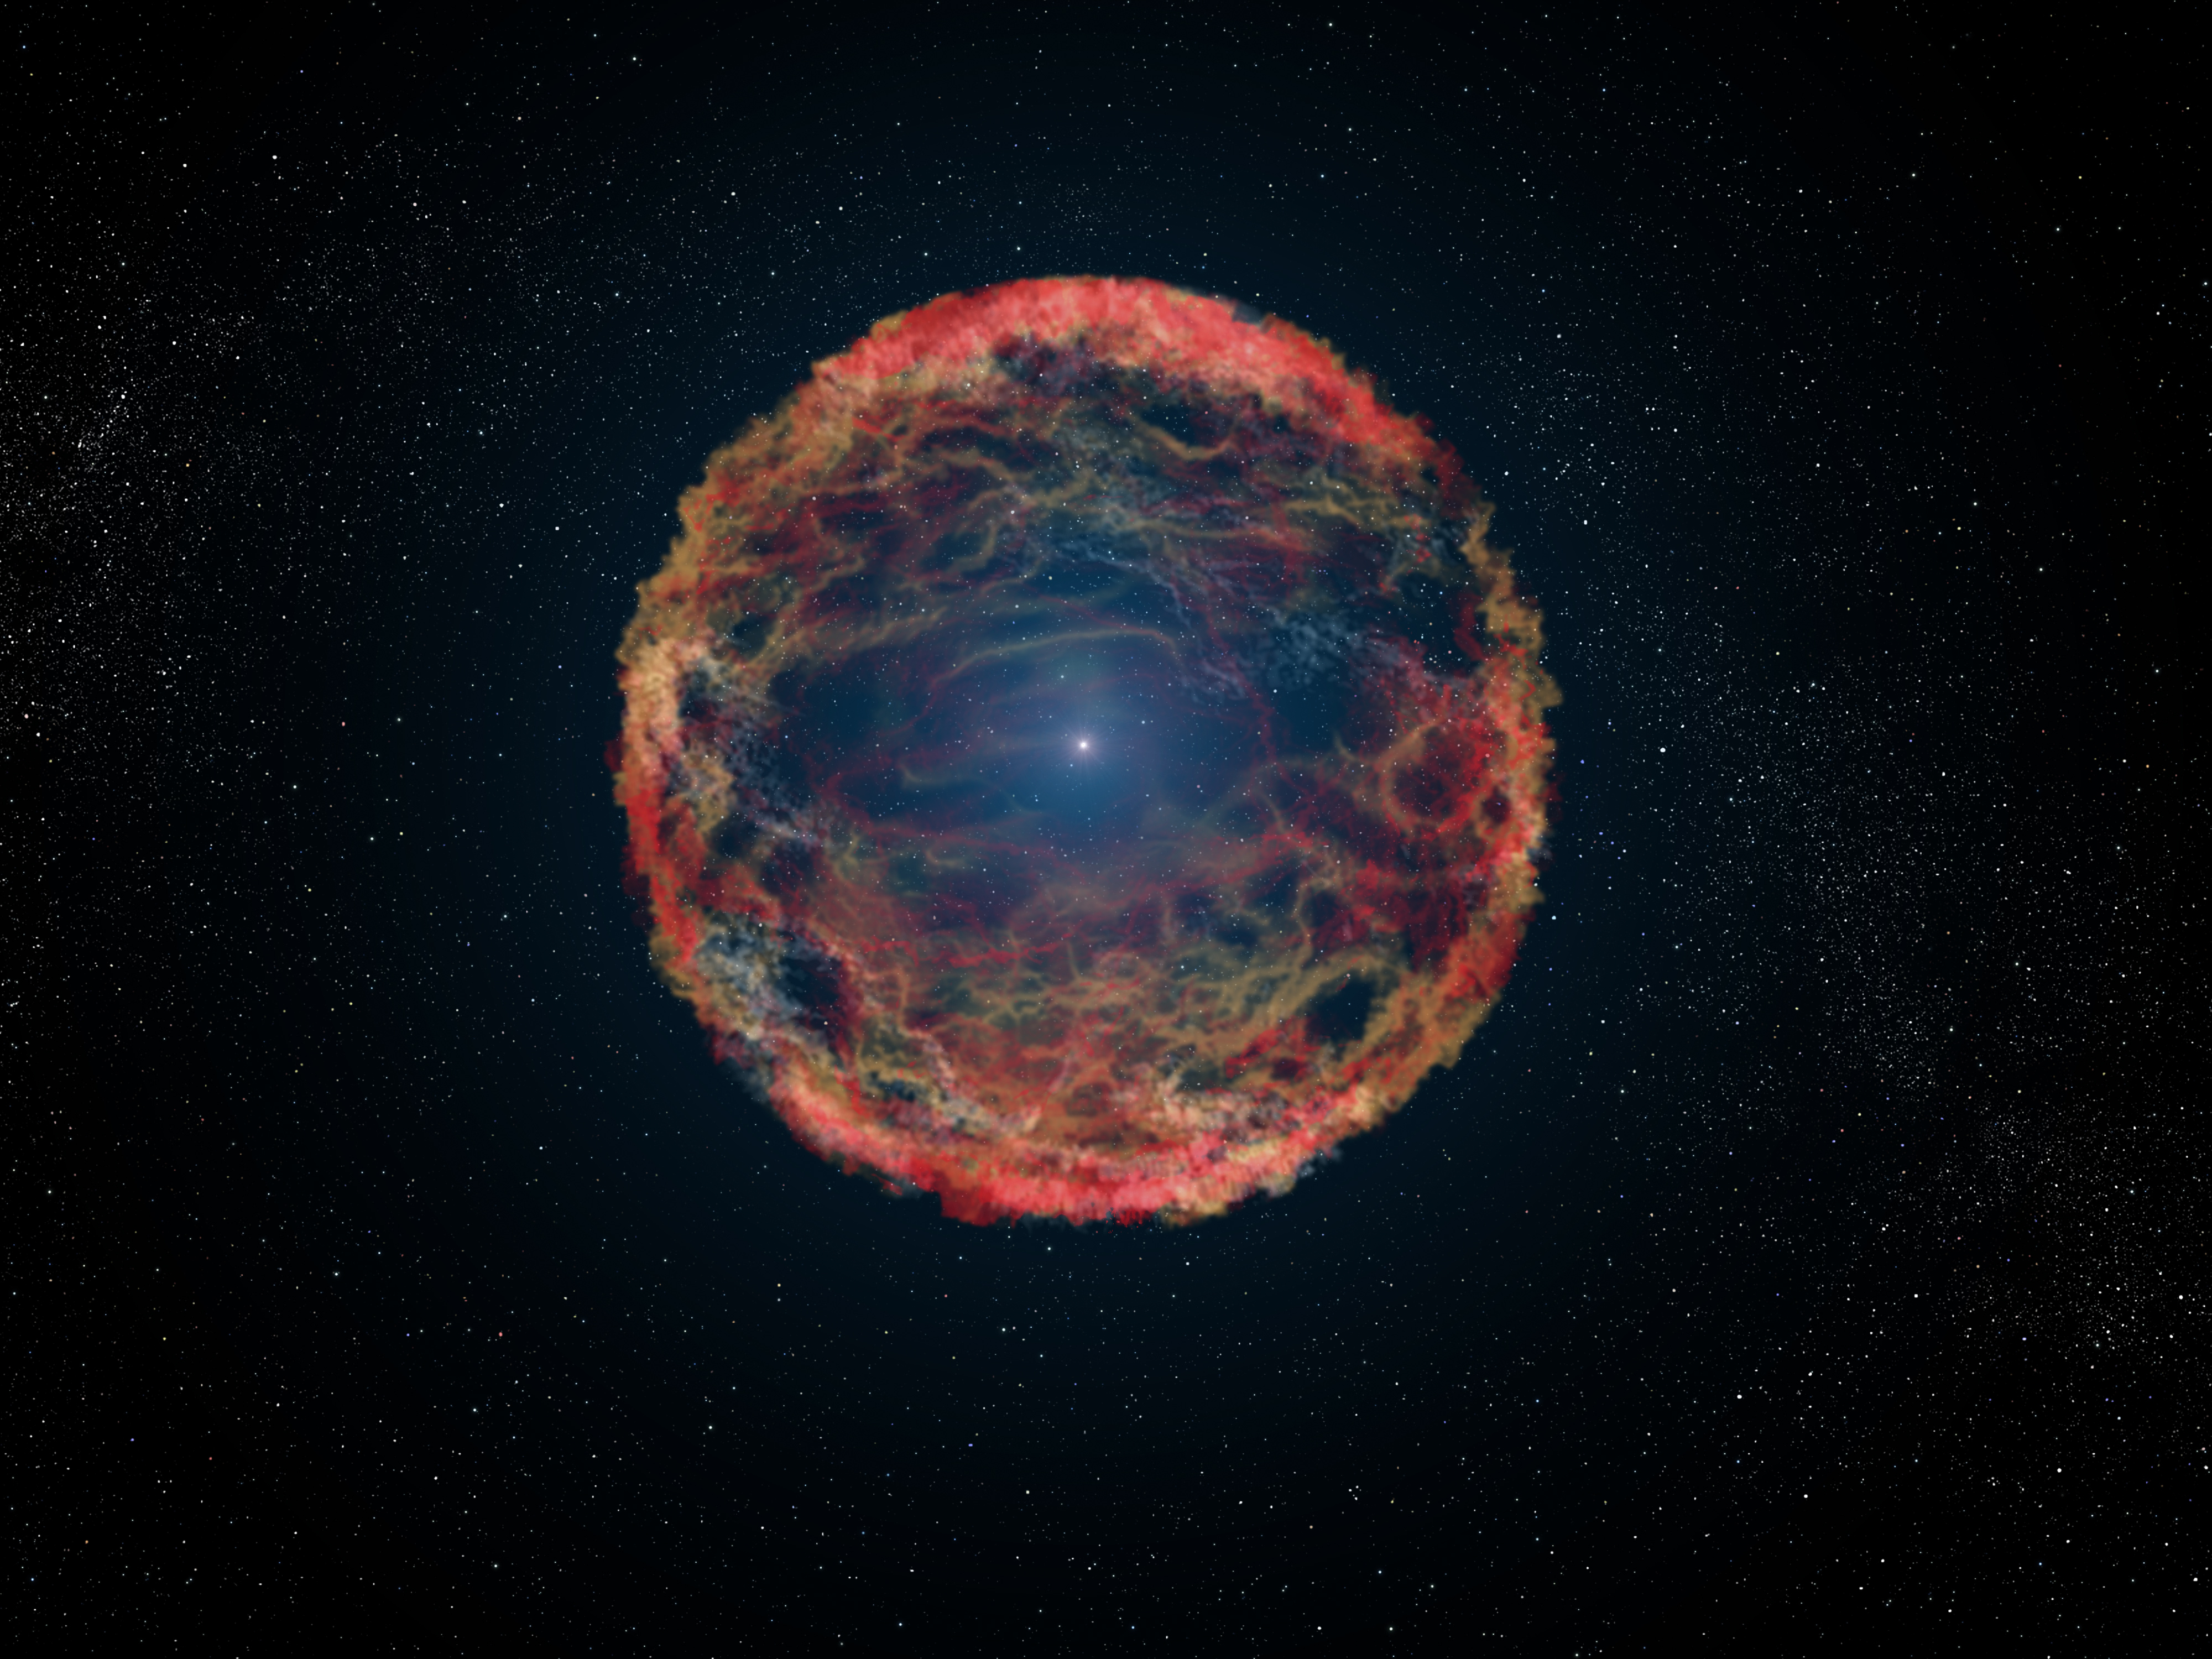 This is an artist's impression of supernova 1993J, an exploding star in the galaxy M81 whose light reached us 21 years ago. The supernova originated in a double-star system where one member was a massive star that exploded after siphoning most of its hydrogen envelope to its companion star. After two decades, astronomers have at last identified the blue helium-burning companion star, seen at the center of the expanding nebula of debris from the supernova. The NASA/ESA Hubble Space Telescope identified the ultraviolet glow of the surviving companion embedded in the fading glow of the supernova. Links:  NASA Press release Spiral galaxy M81 Supernova 1993J in spiral galaxy M81 Supernova 1993J Scenario for Type IIb supernova 1993J